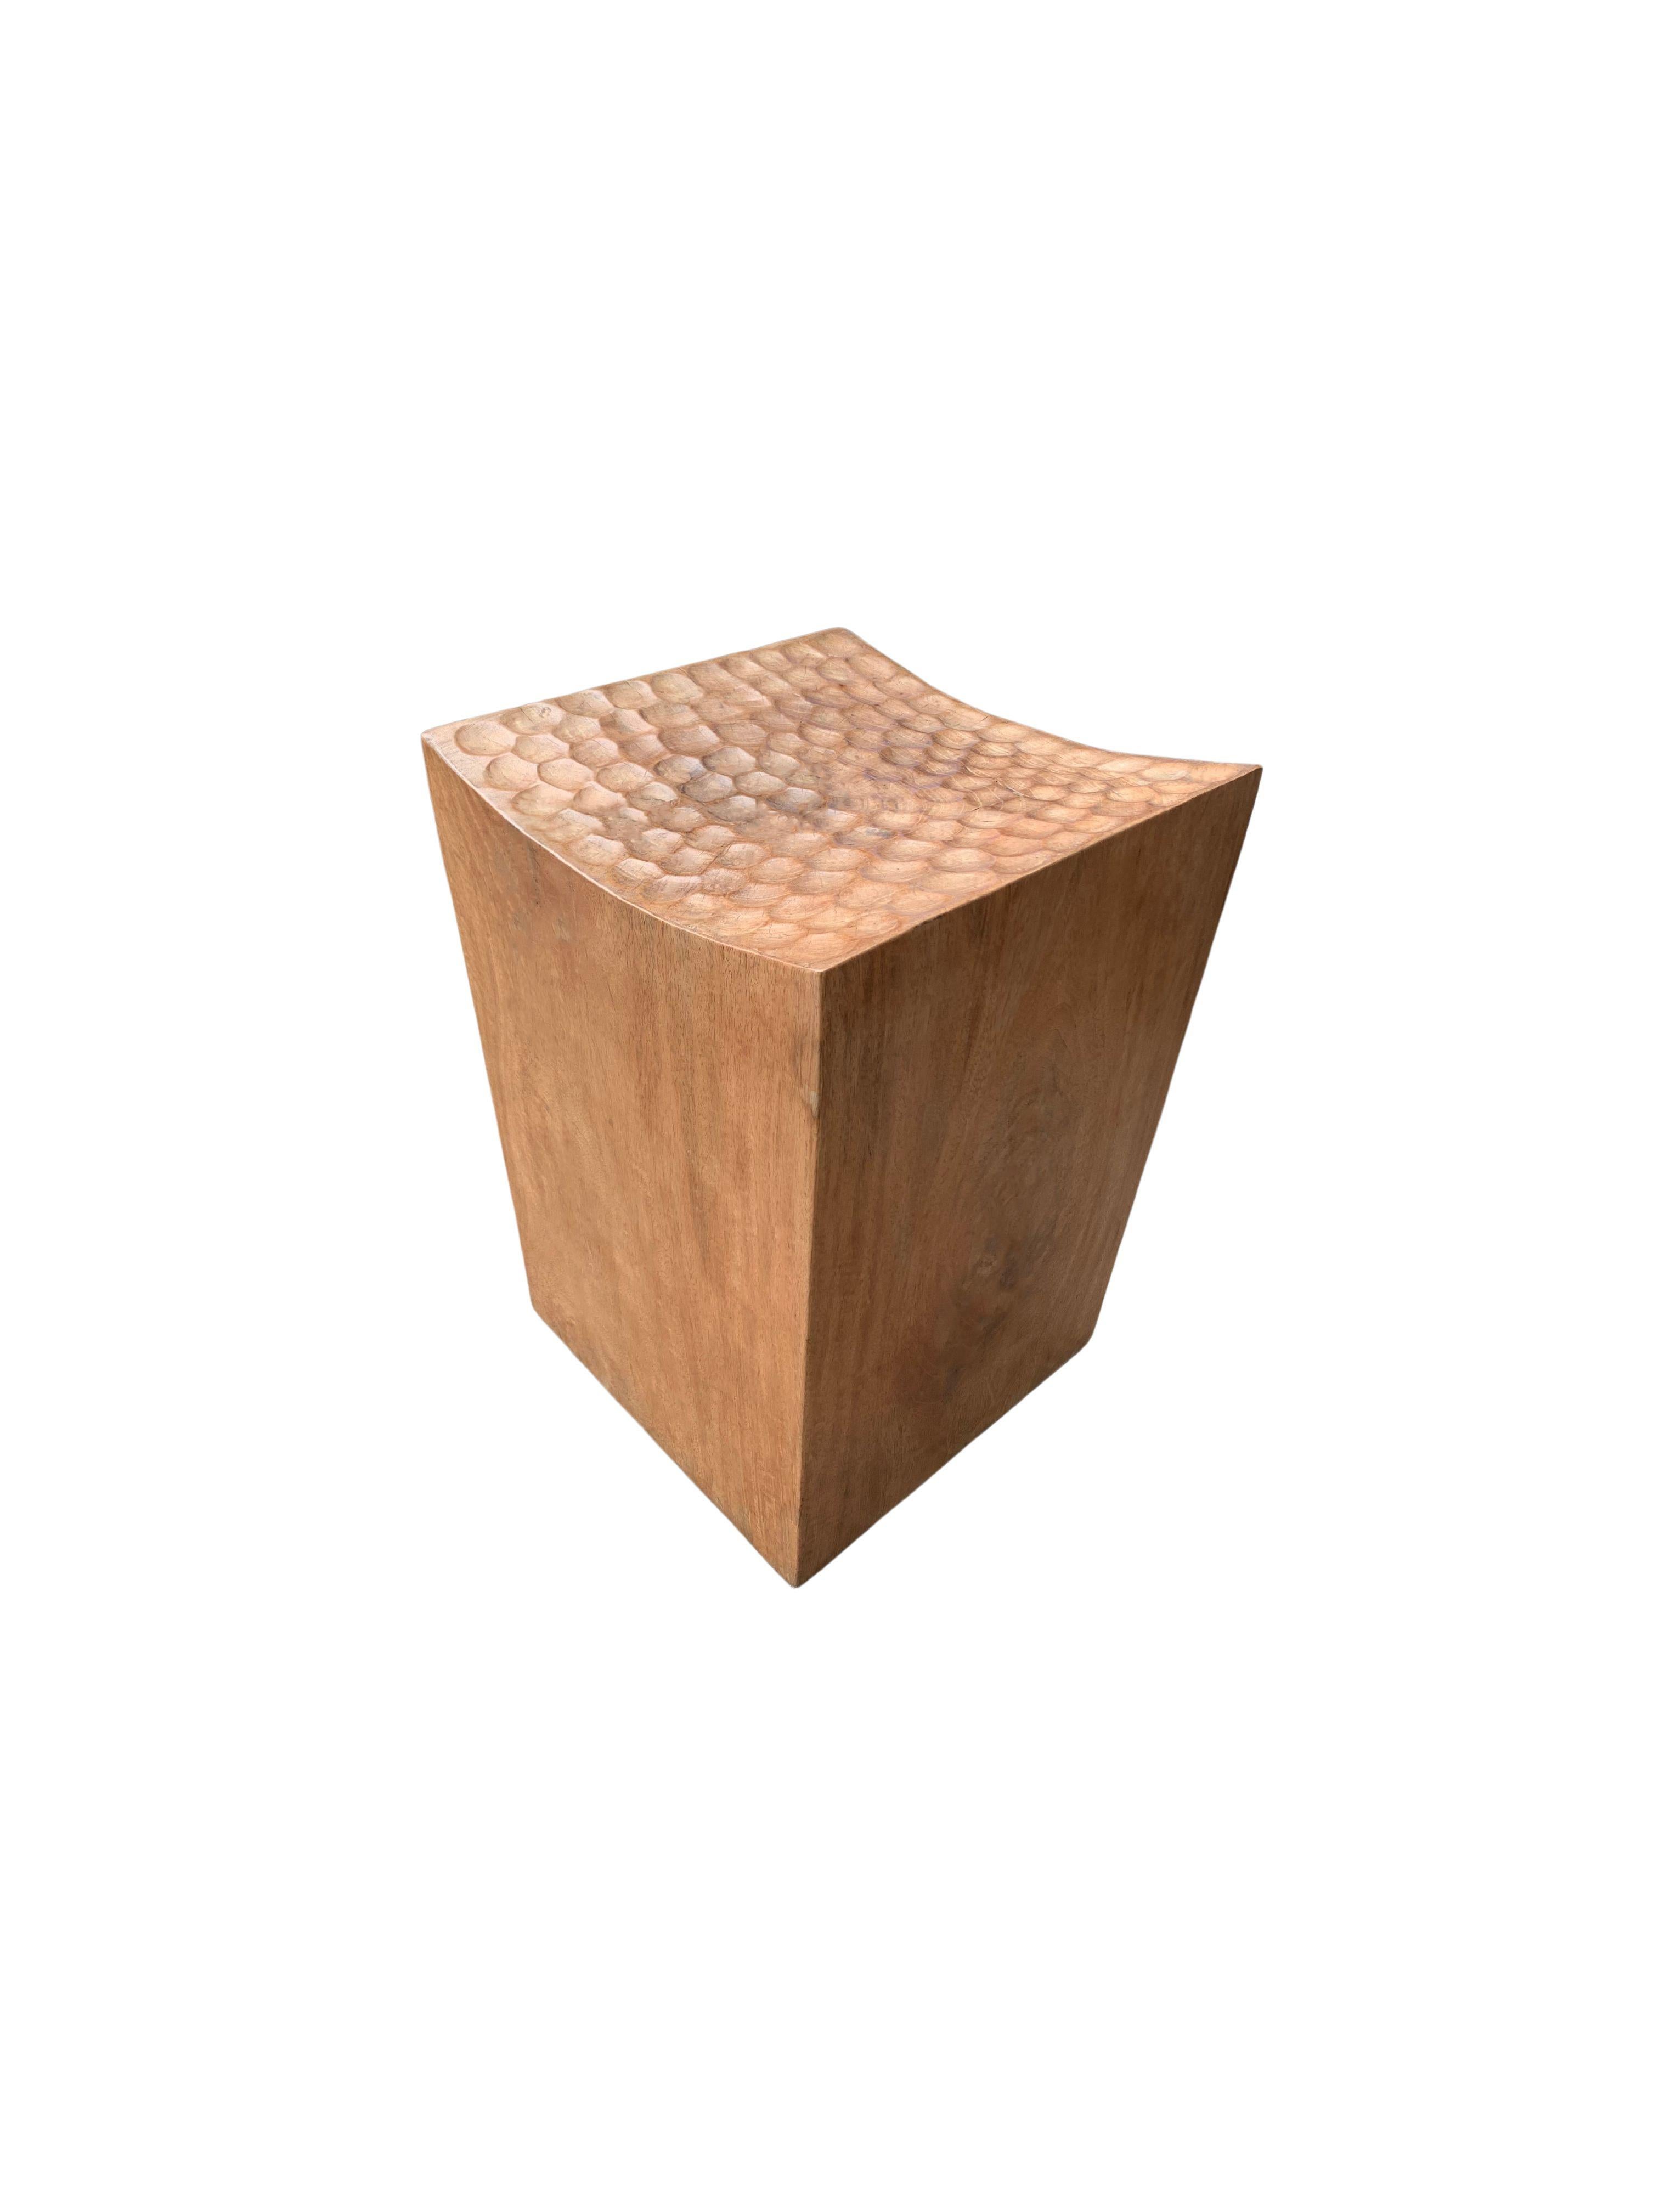 A wonderfully sculptural stool with mix of wood textures and shades. A uniquely sculptural and versatile piece, this chair was crafted from a single block of mango wood and has a smooth texture. Meticulously carved, sanded and smoothed to the